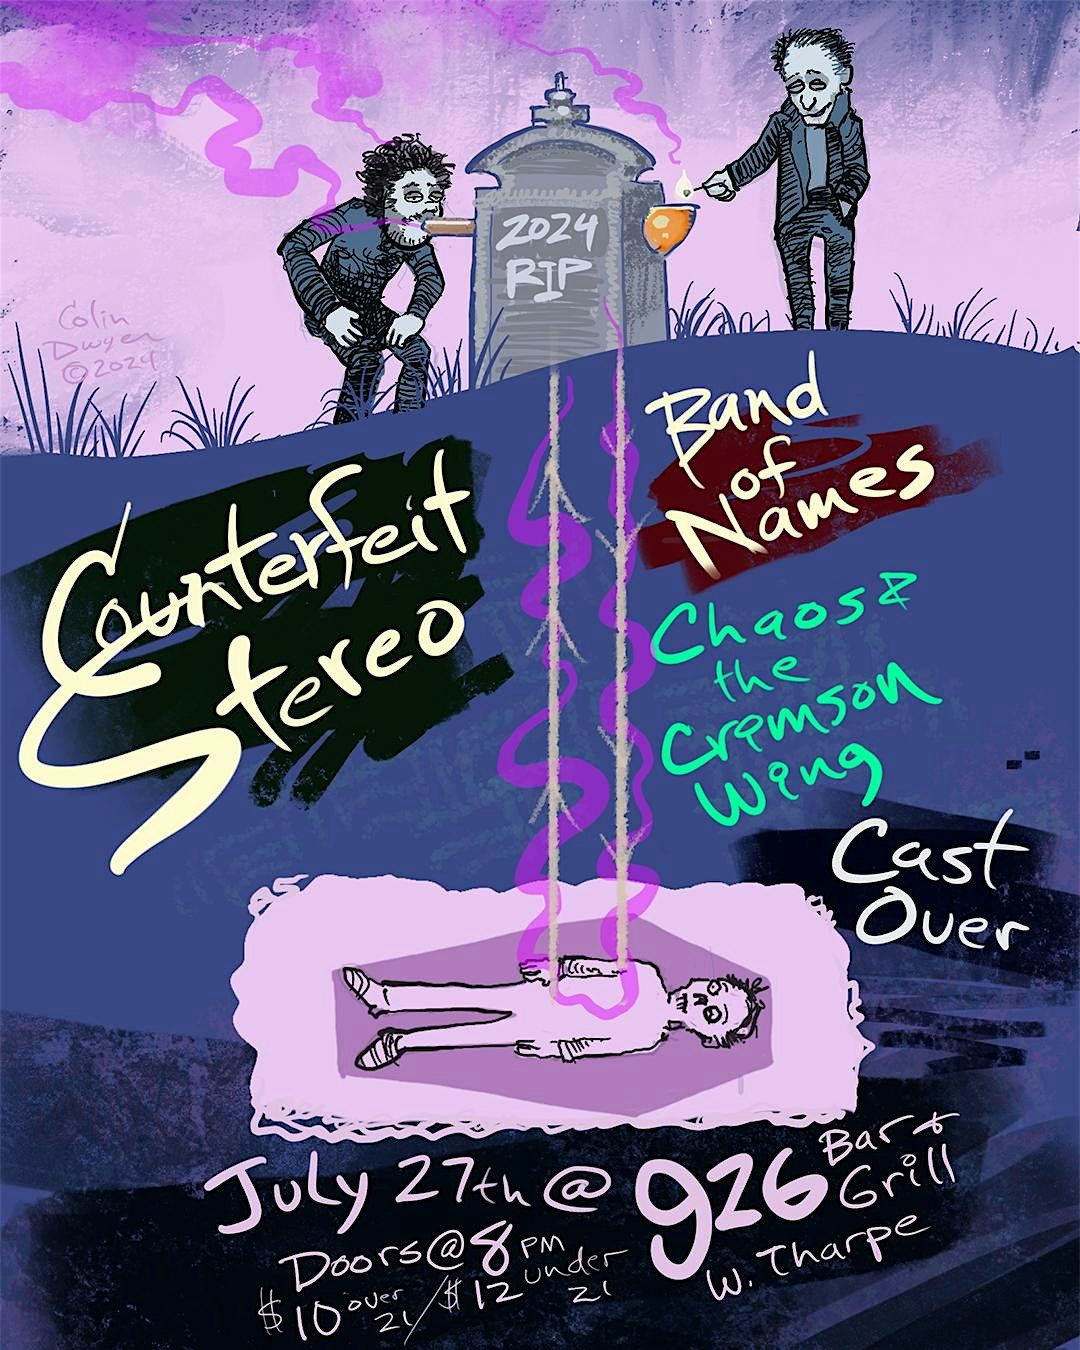 Counterfeit Stereo w\/ Band of Names, Chaos and The Crimson Wing, Cast Over